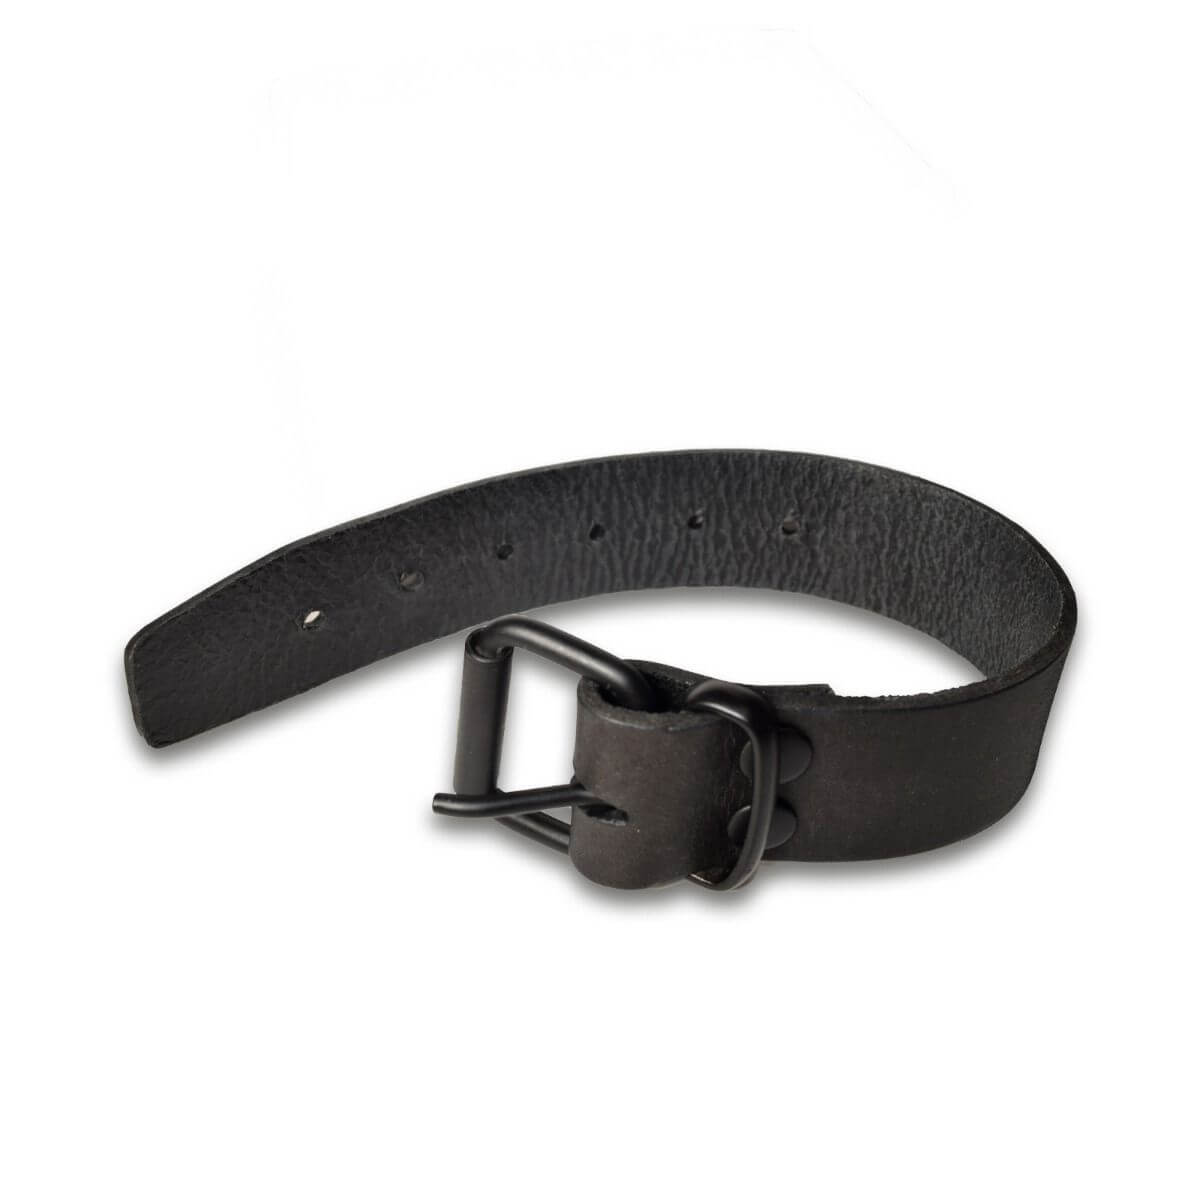 Prowler RED Leather Buckle Bicep Strap (8233989865711)